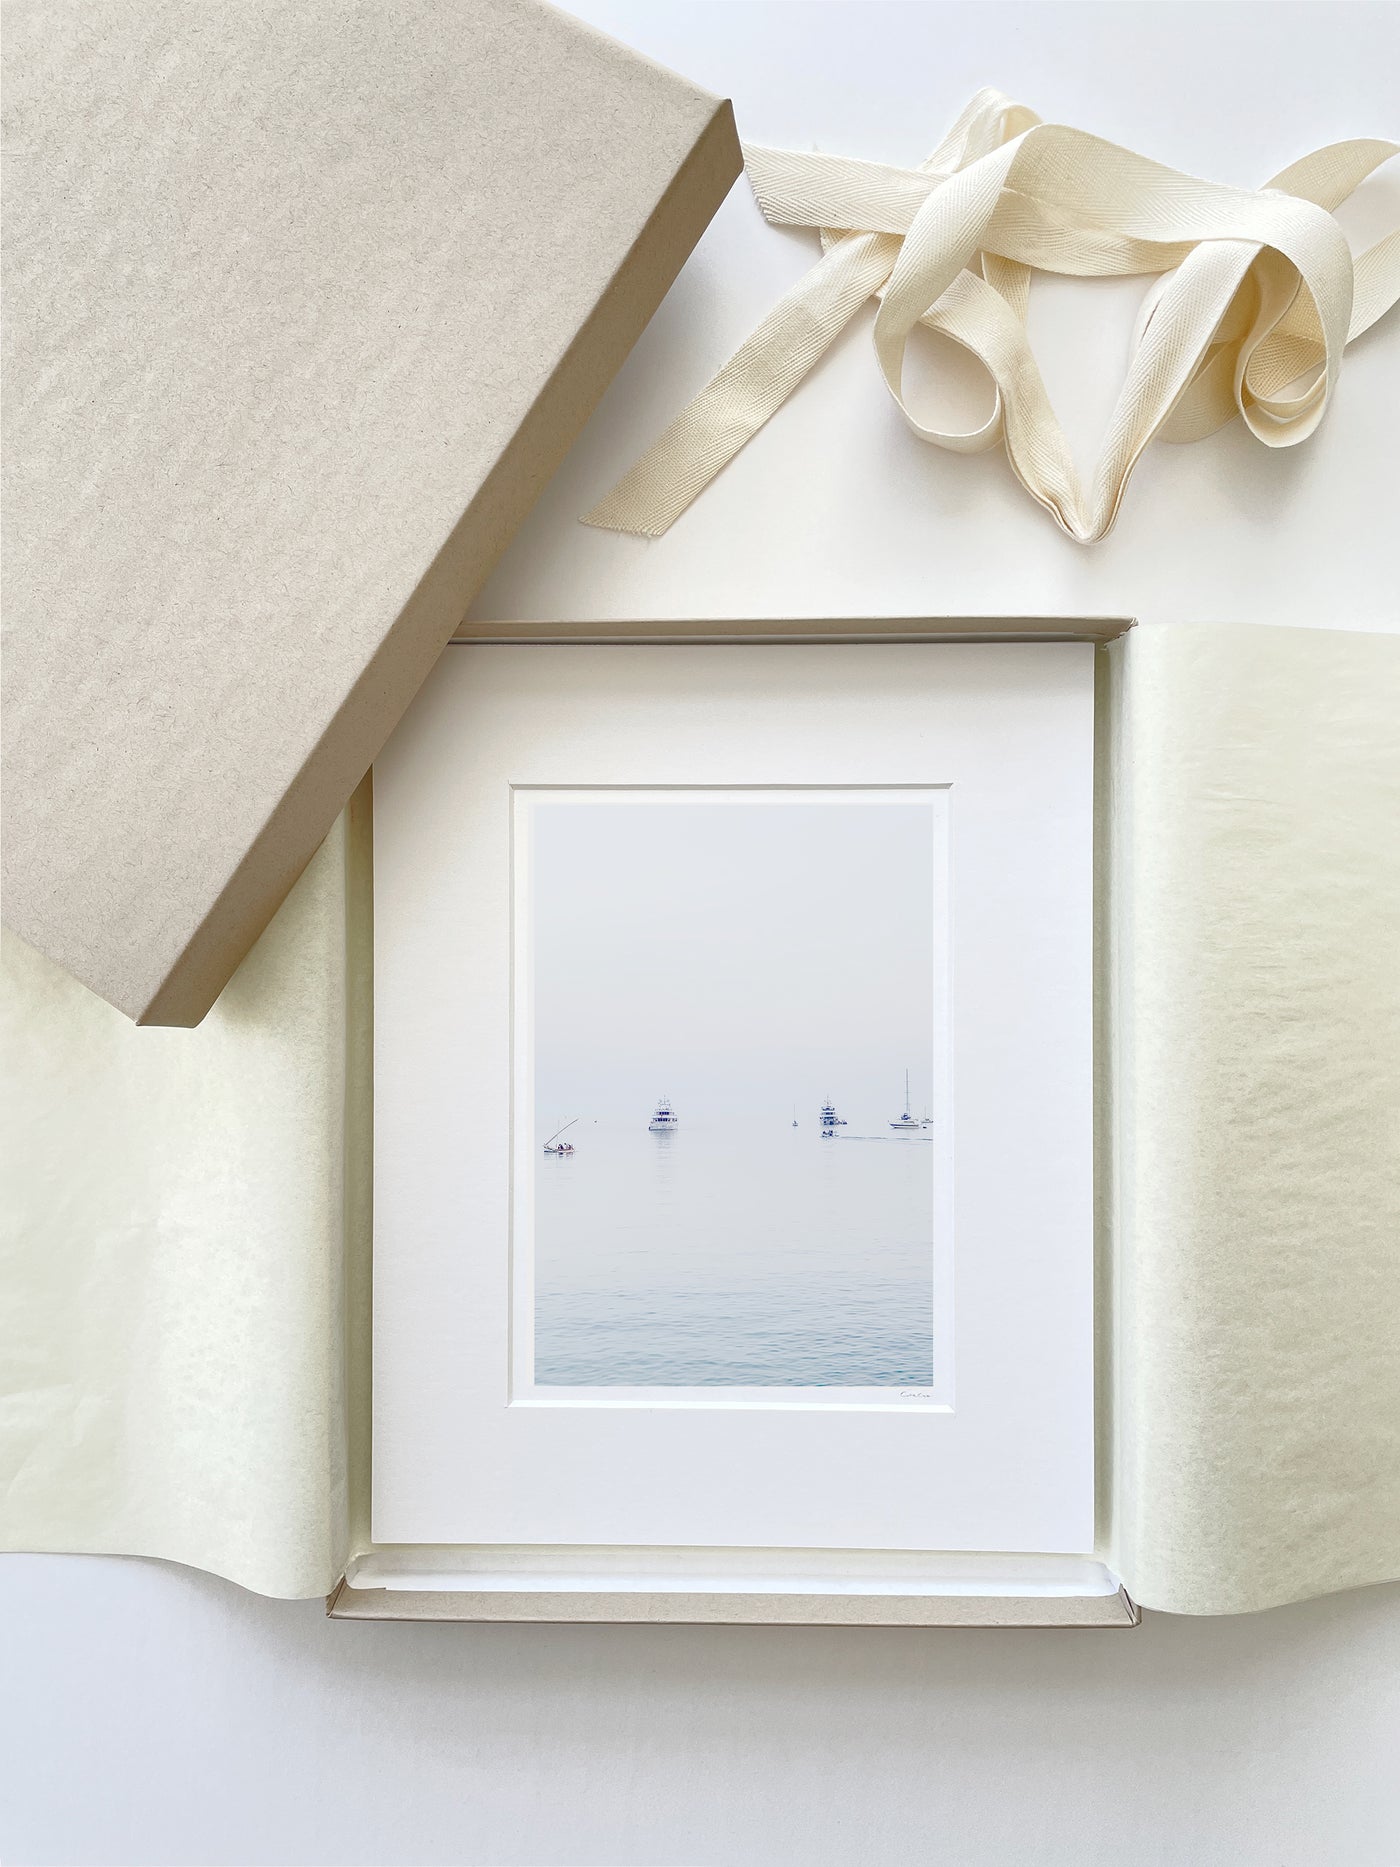 Evening in Villefranche-sur-Mer - Boats wall art by Cattie Coyle Photography in gift box